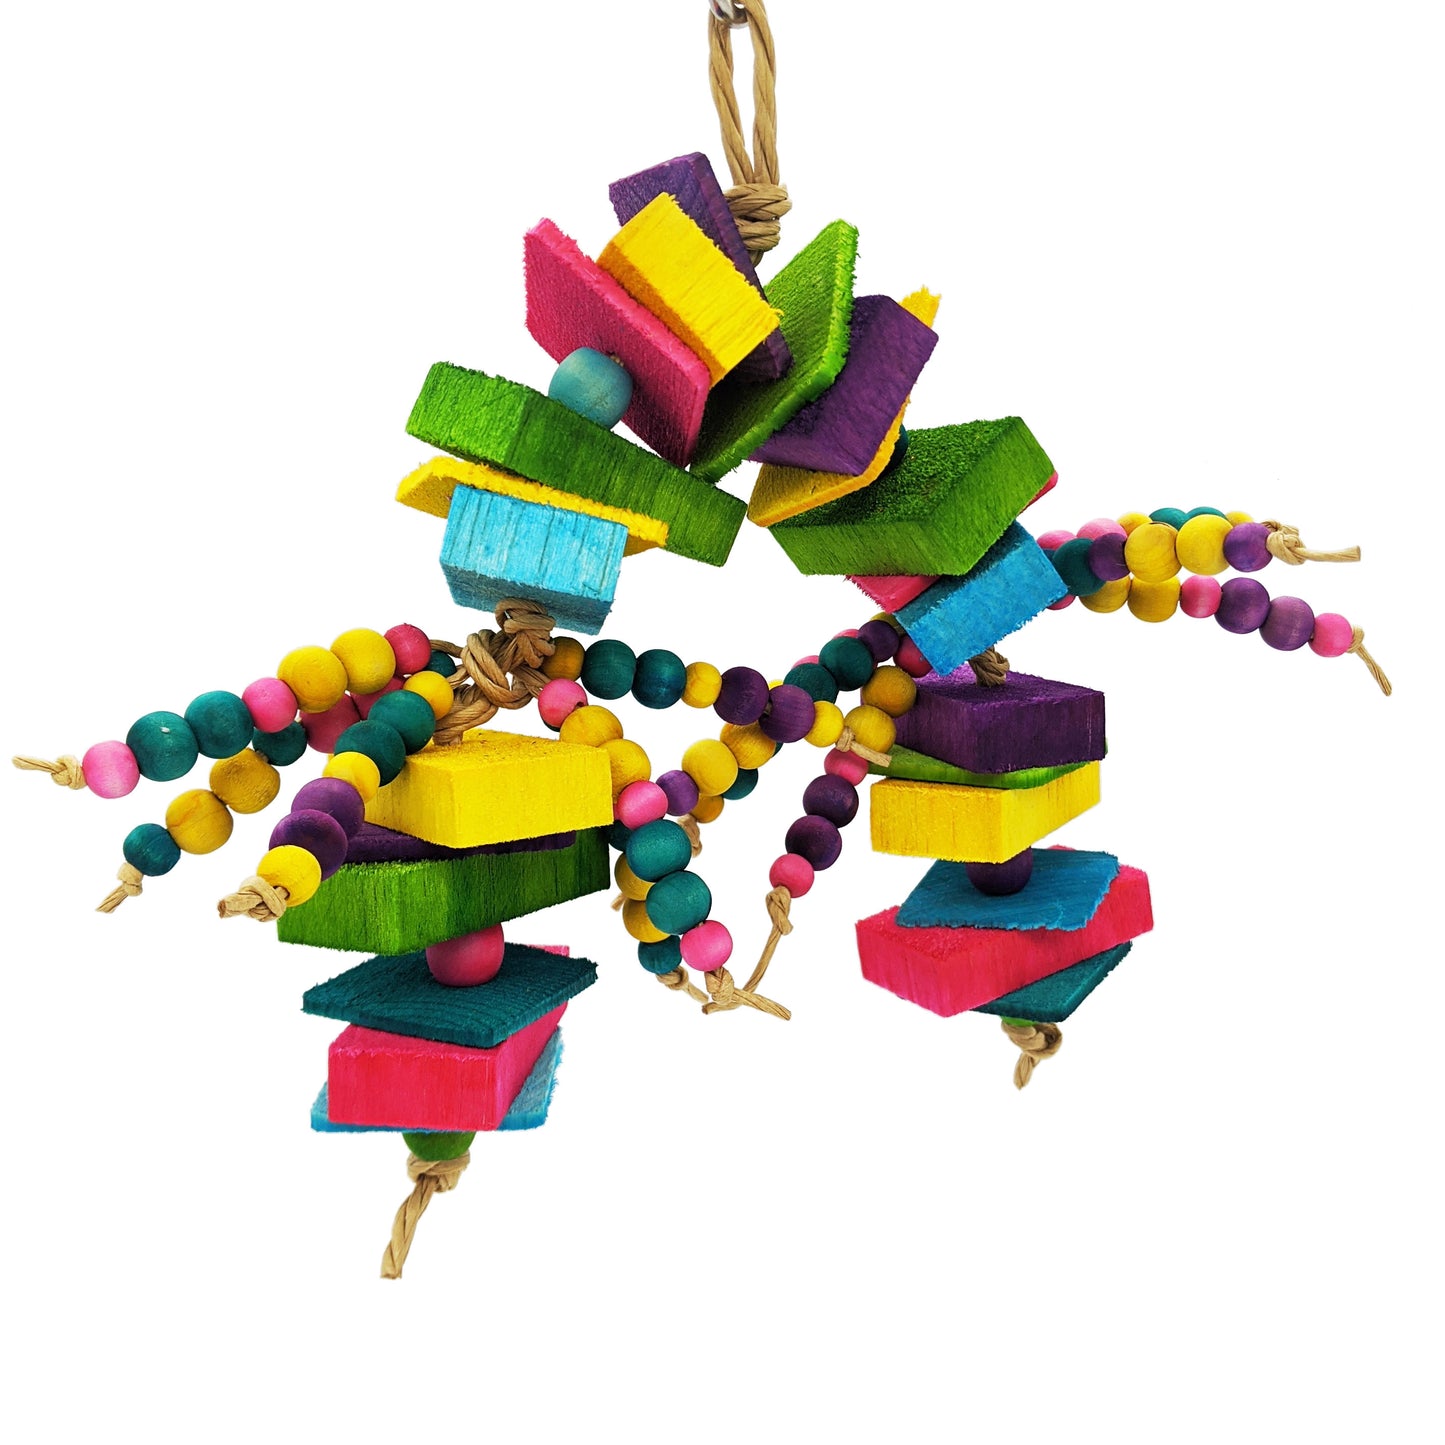 A brightly colored parrot toy. Has alternating sections of 1/8 thin pine with 1/2 inch balsa slats, separated by 1/2 inch wooden barrel beads. In the middle of the toy are two sections of 6 strands each of 8mm and 10mm wooden beads. 